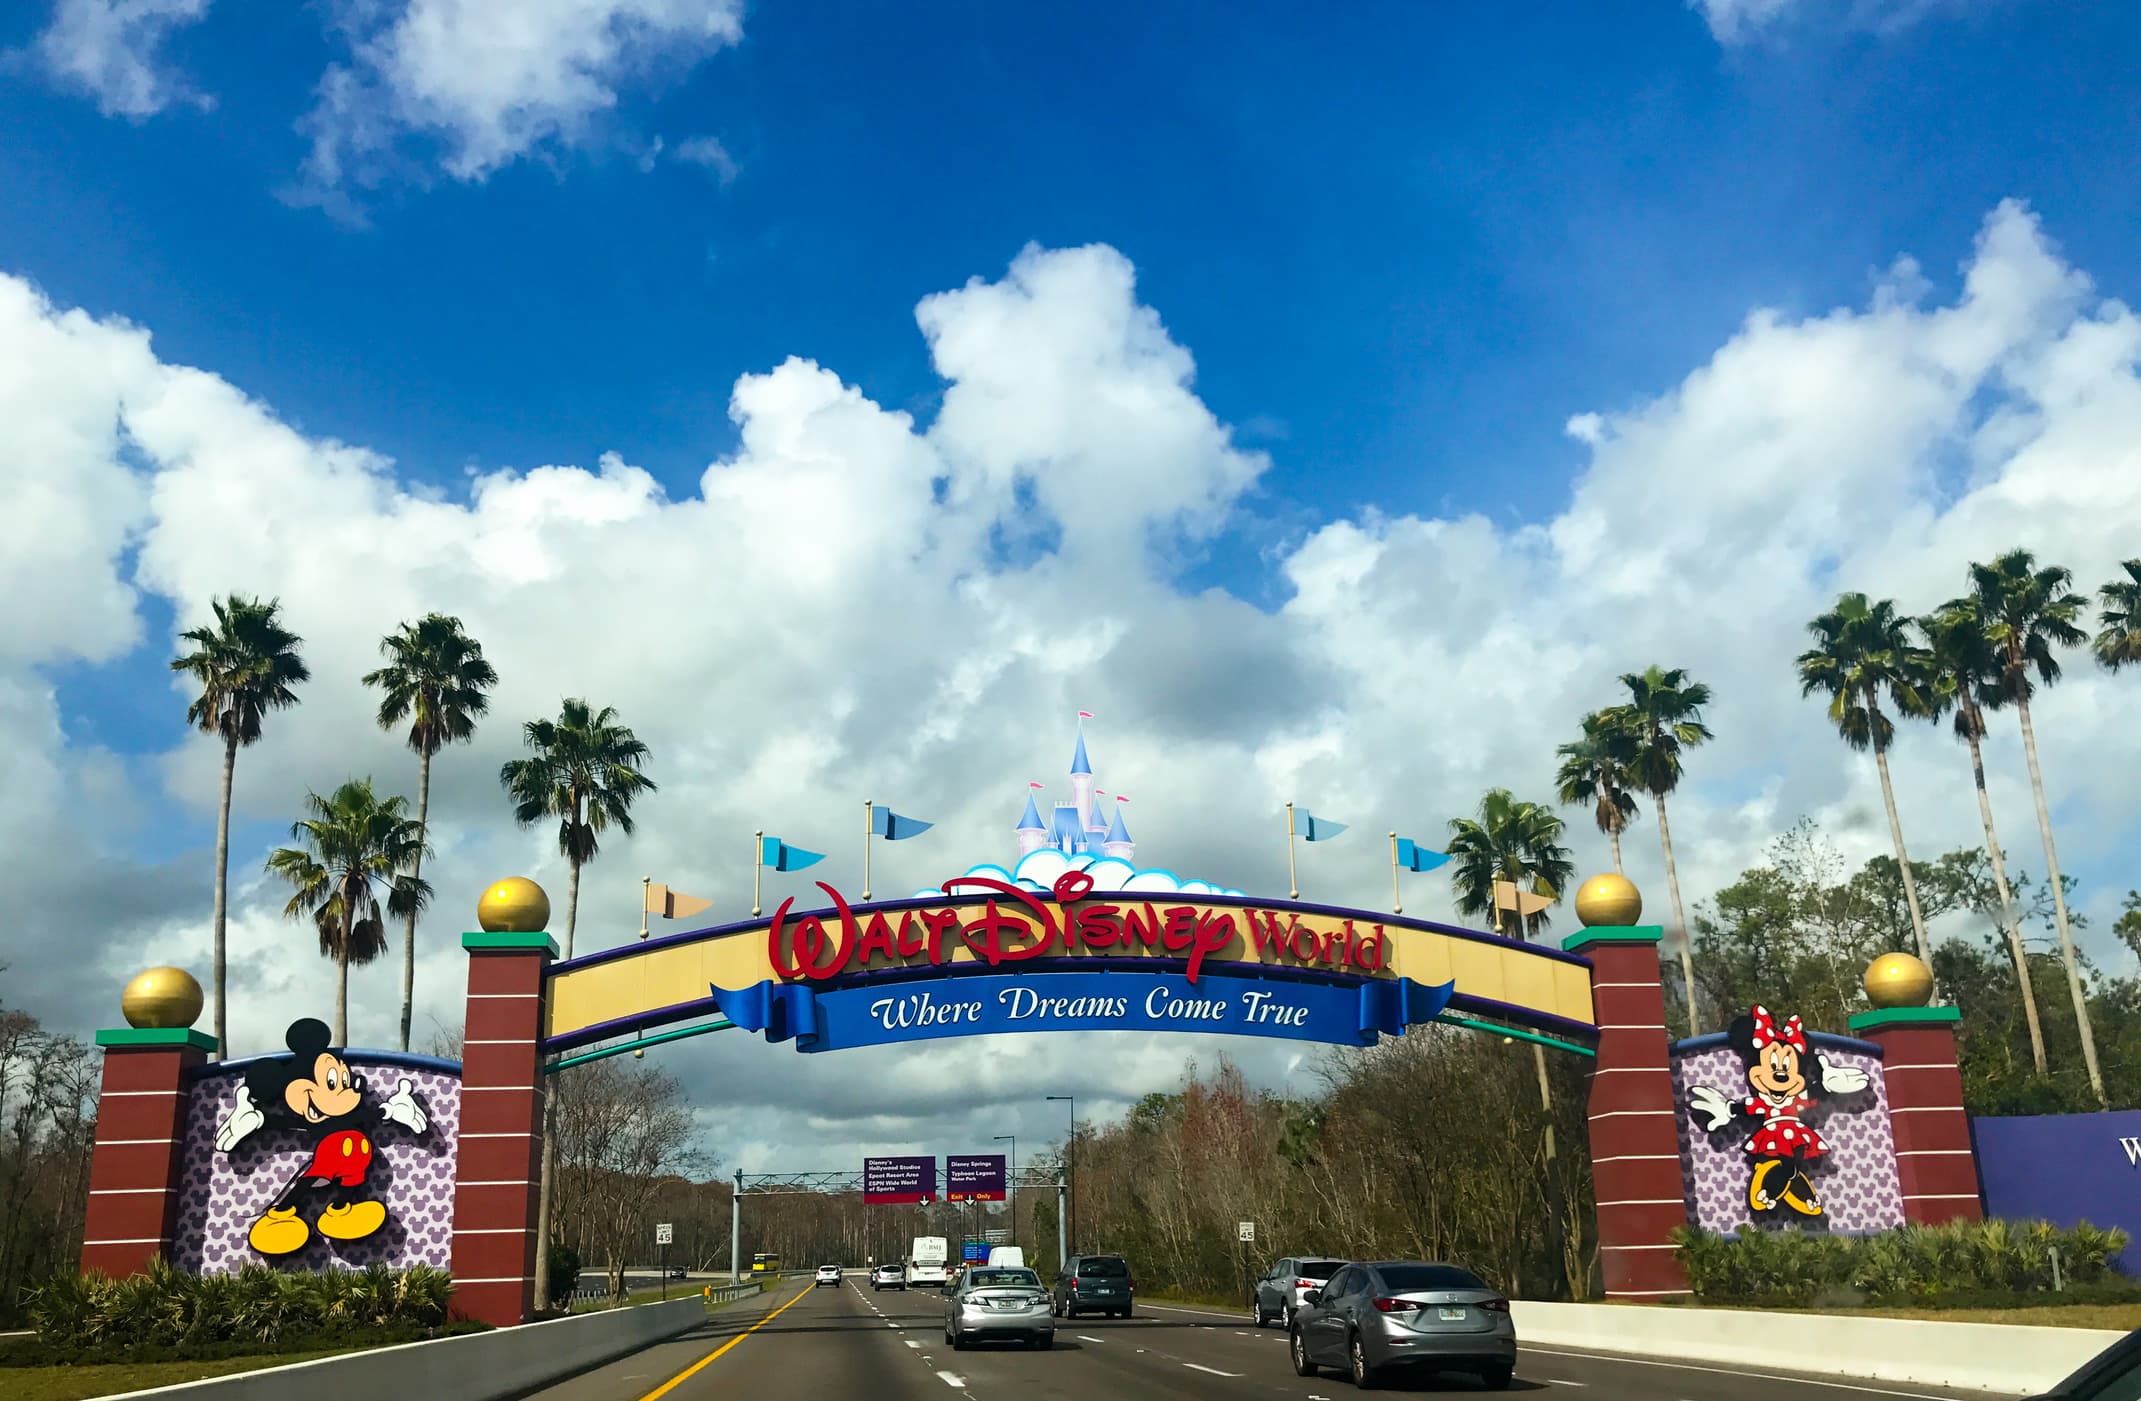 A view of cars entering Walt Disney World, Orlando, with a sign and image of Mickey Mouse